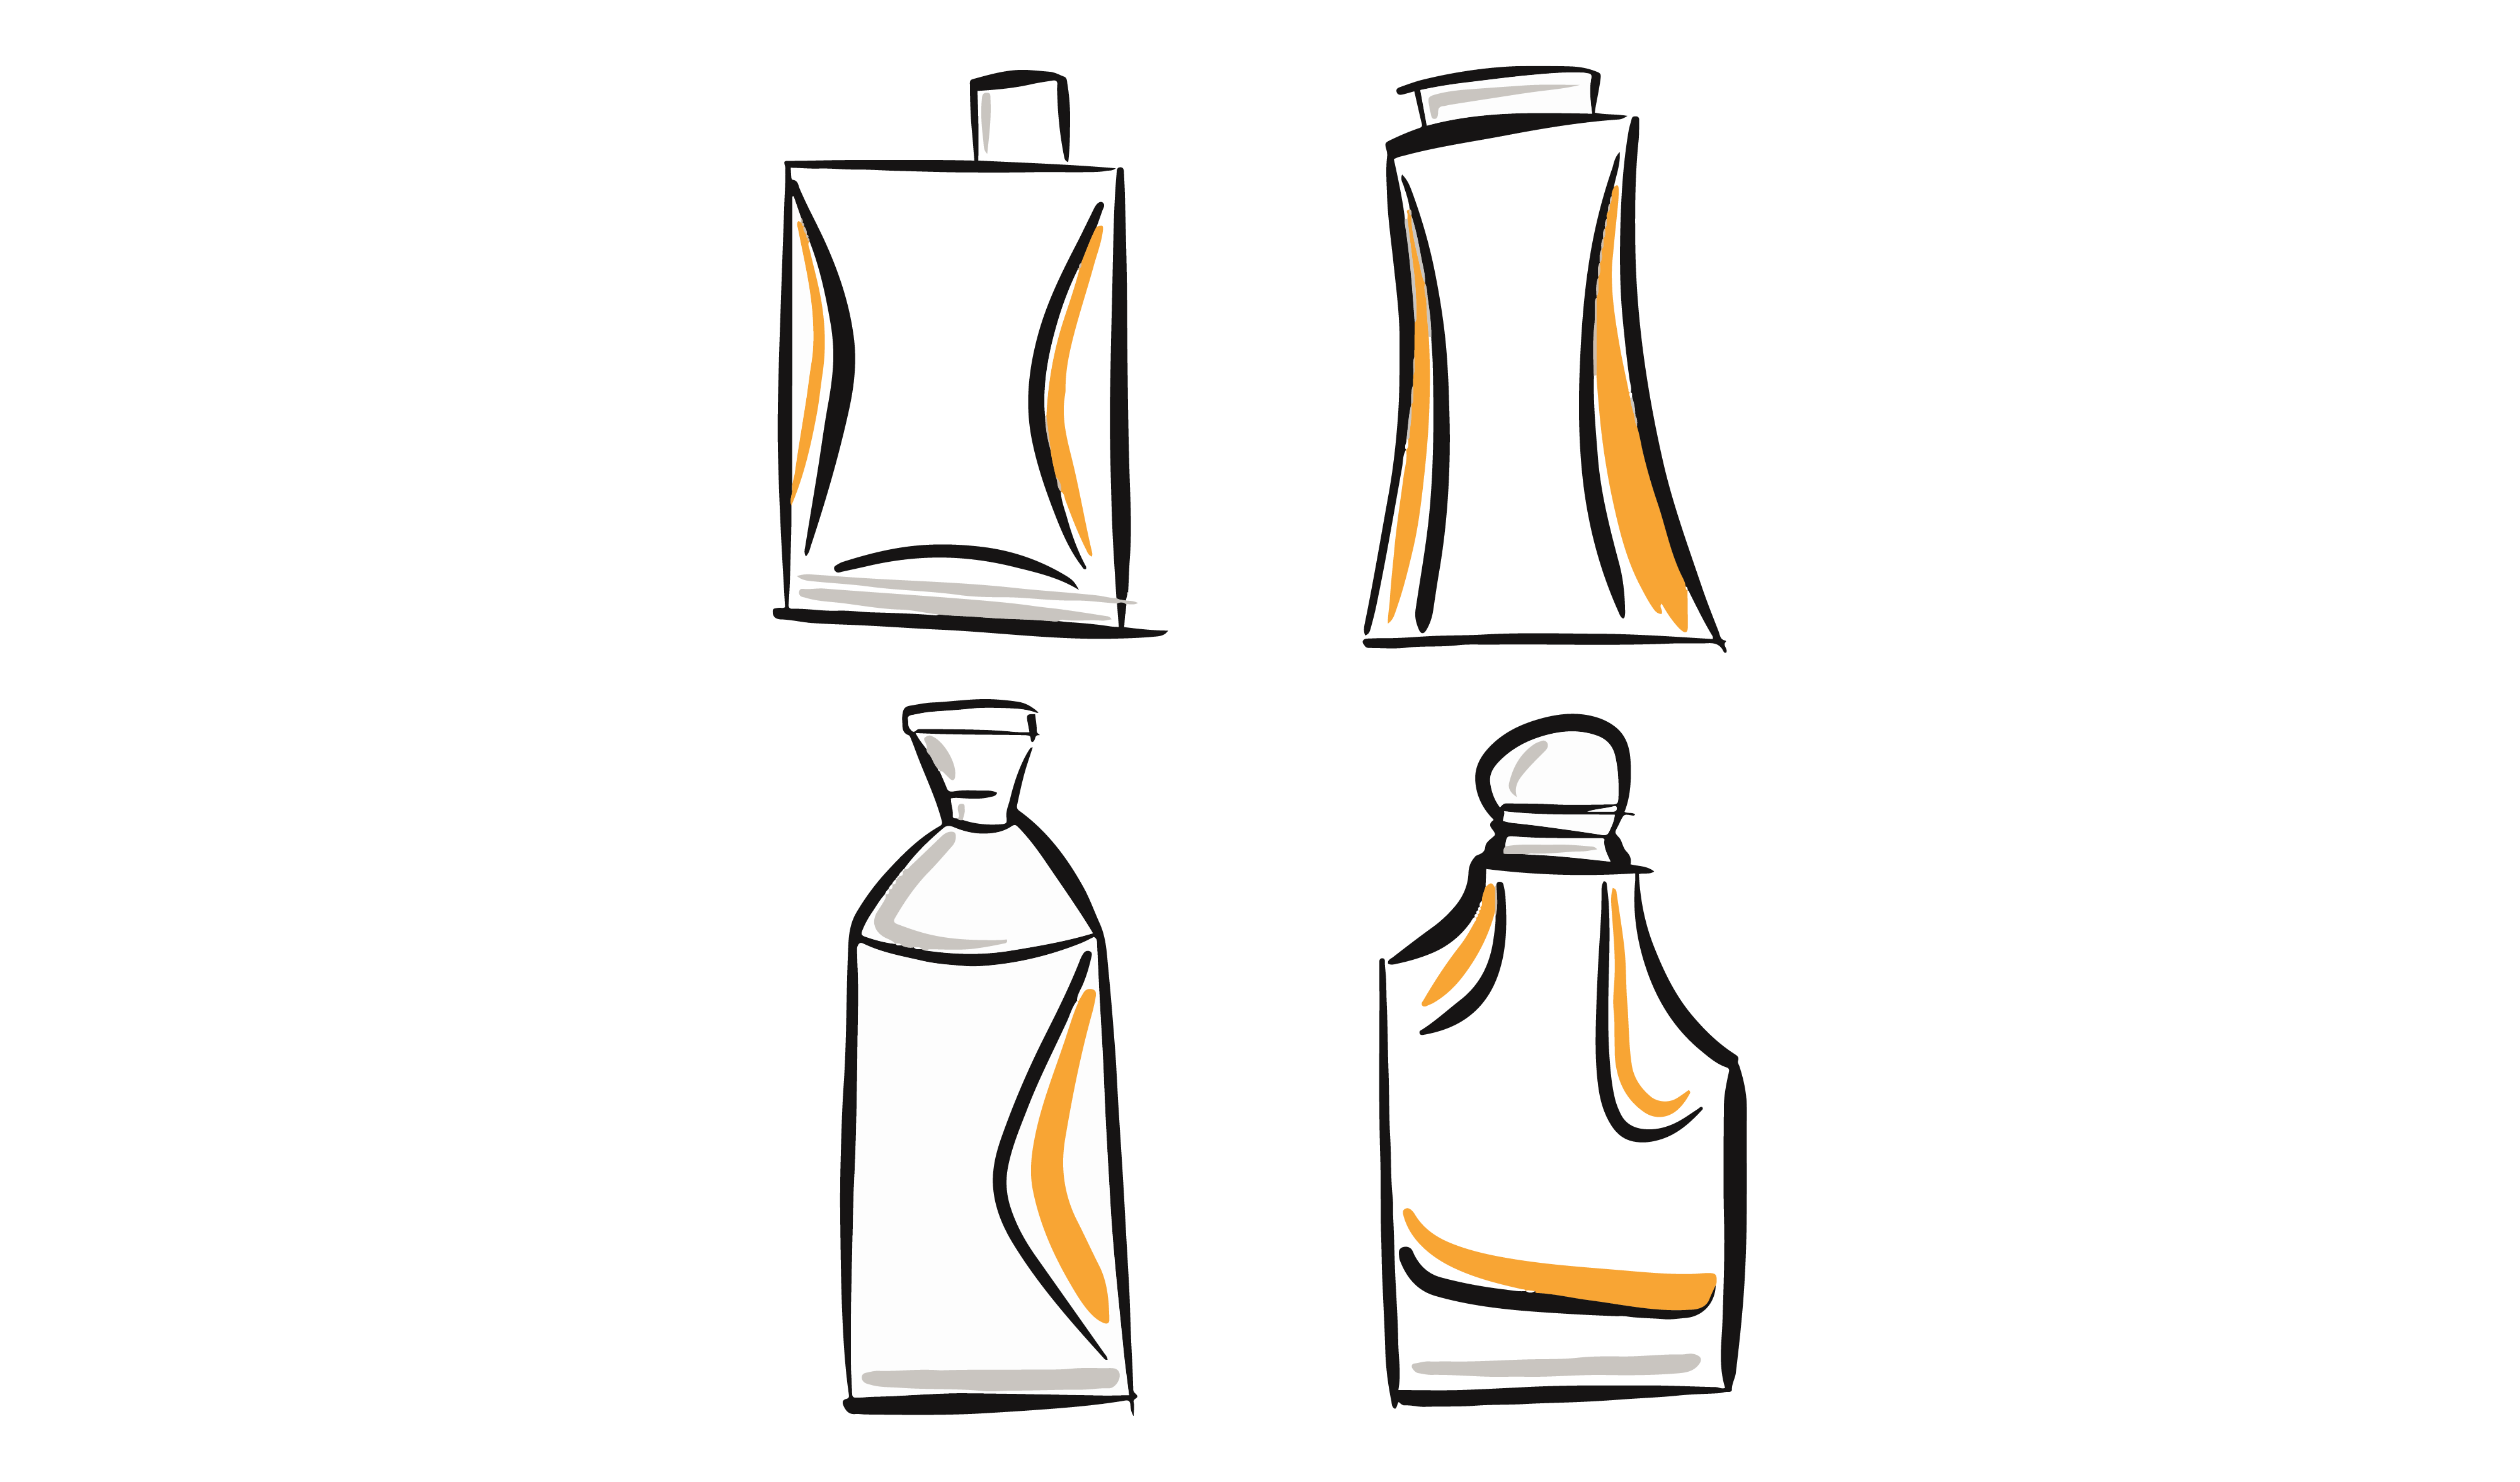 Sketches of 4 different bottles show different placements, sizes, or organization of the same components, including the top, the interior volume, and the overall bottle shape.